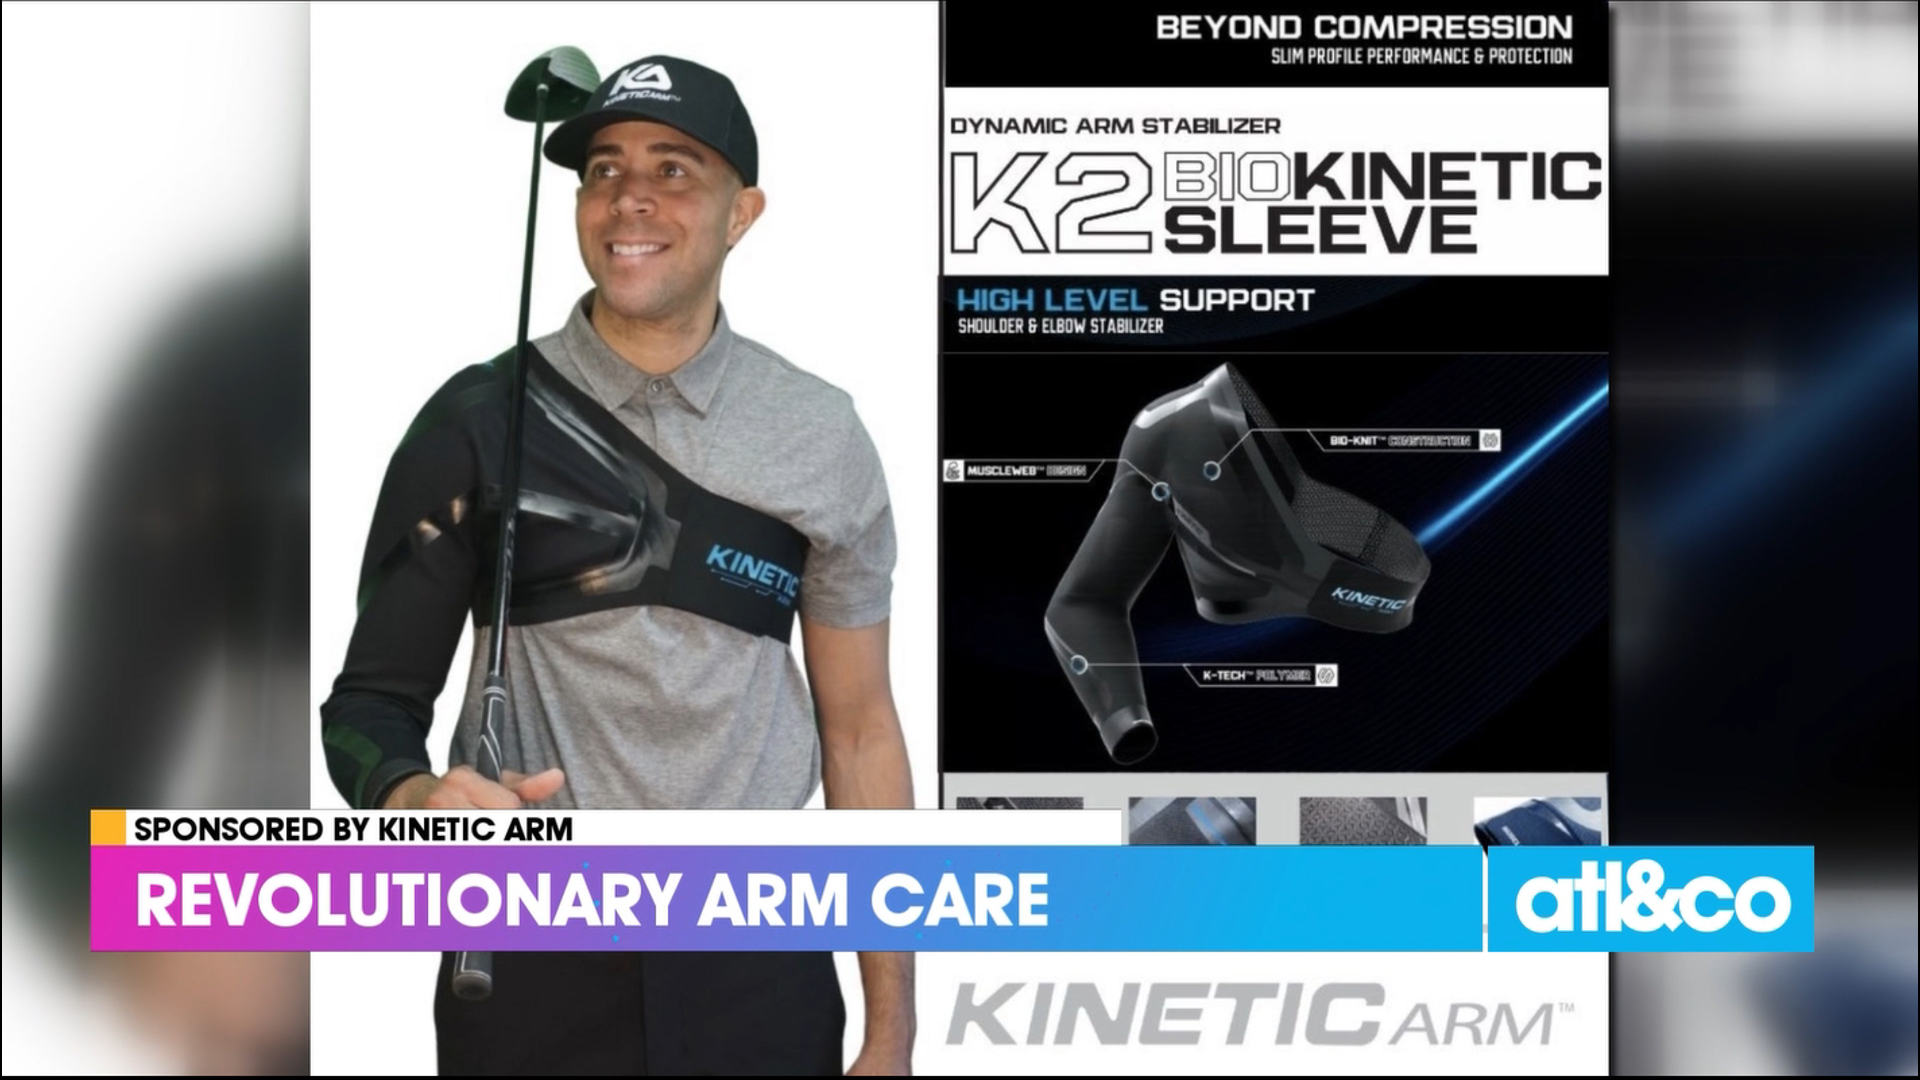 Athletes wear the Kinetic Arm sleeve to help arm mechanics and alleviate stress while throwing and swinging.